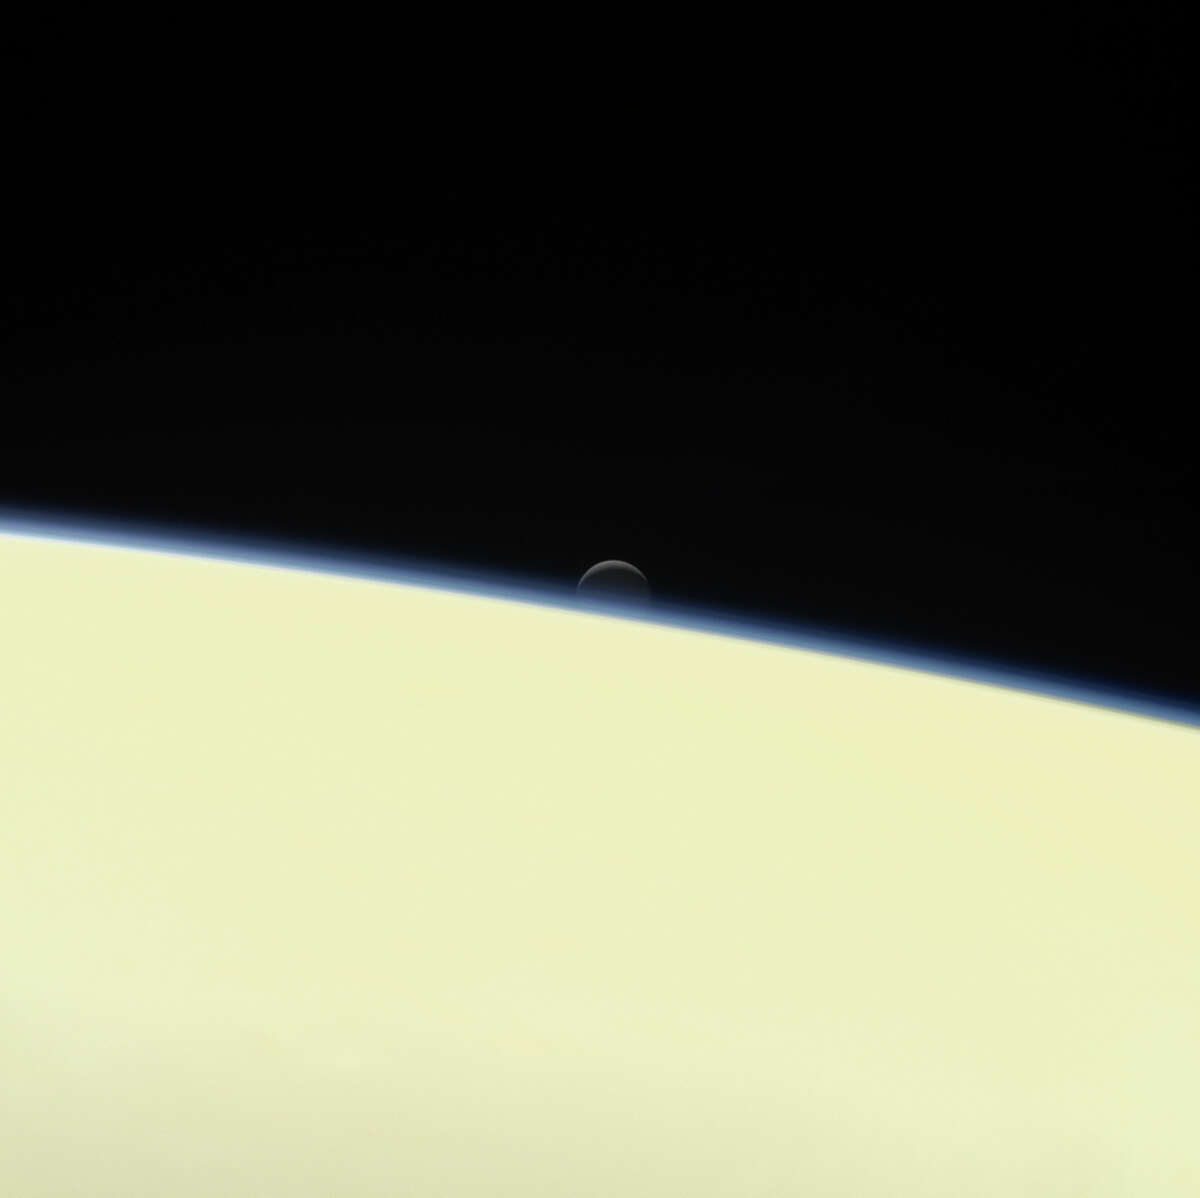 This image shows the moon Enceladus and the edge of Saturn as seen from the Cassini spacecraft on its descent toward the planet Wednesday.﻿